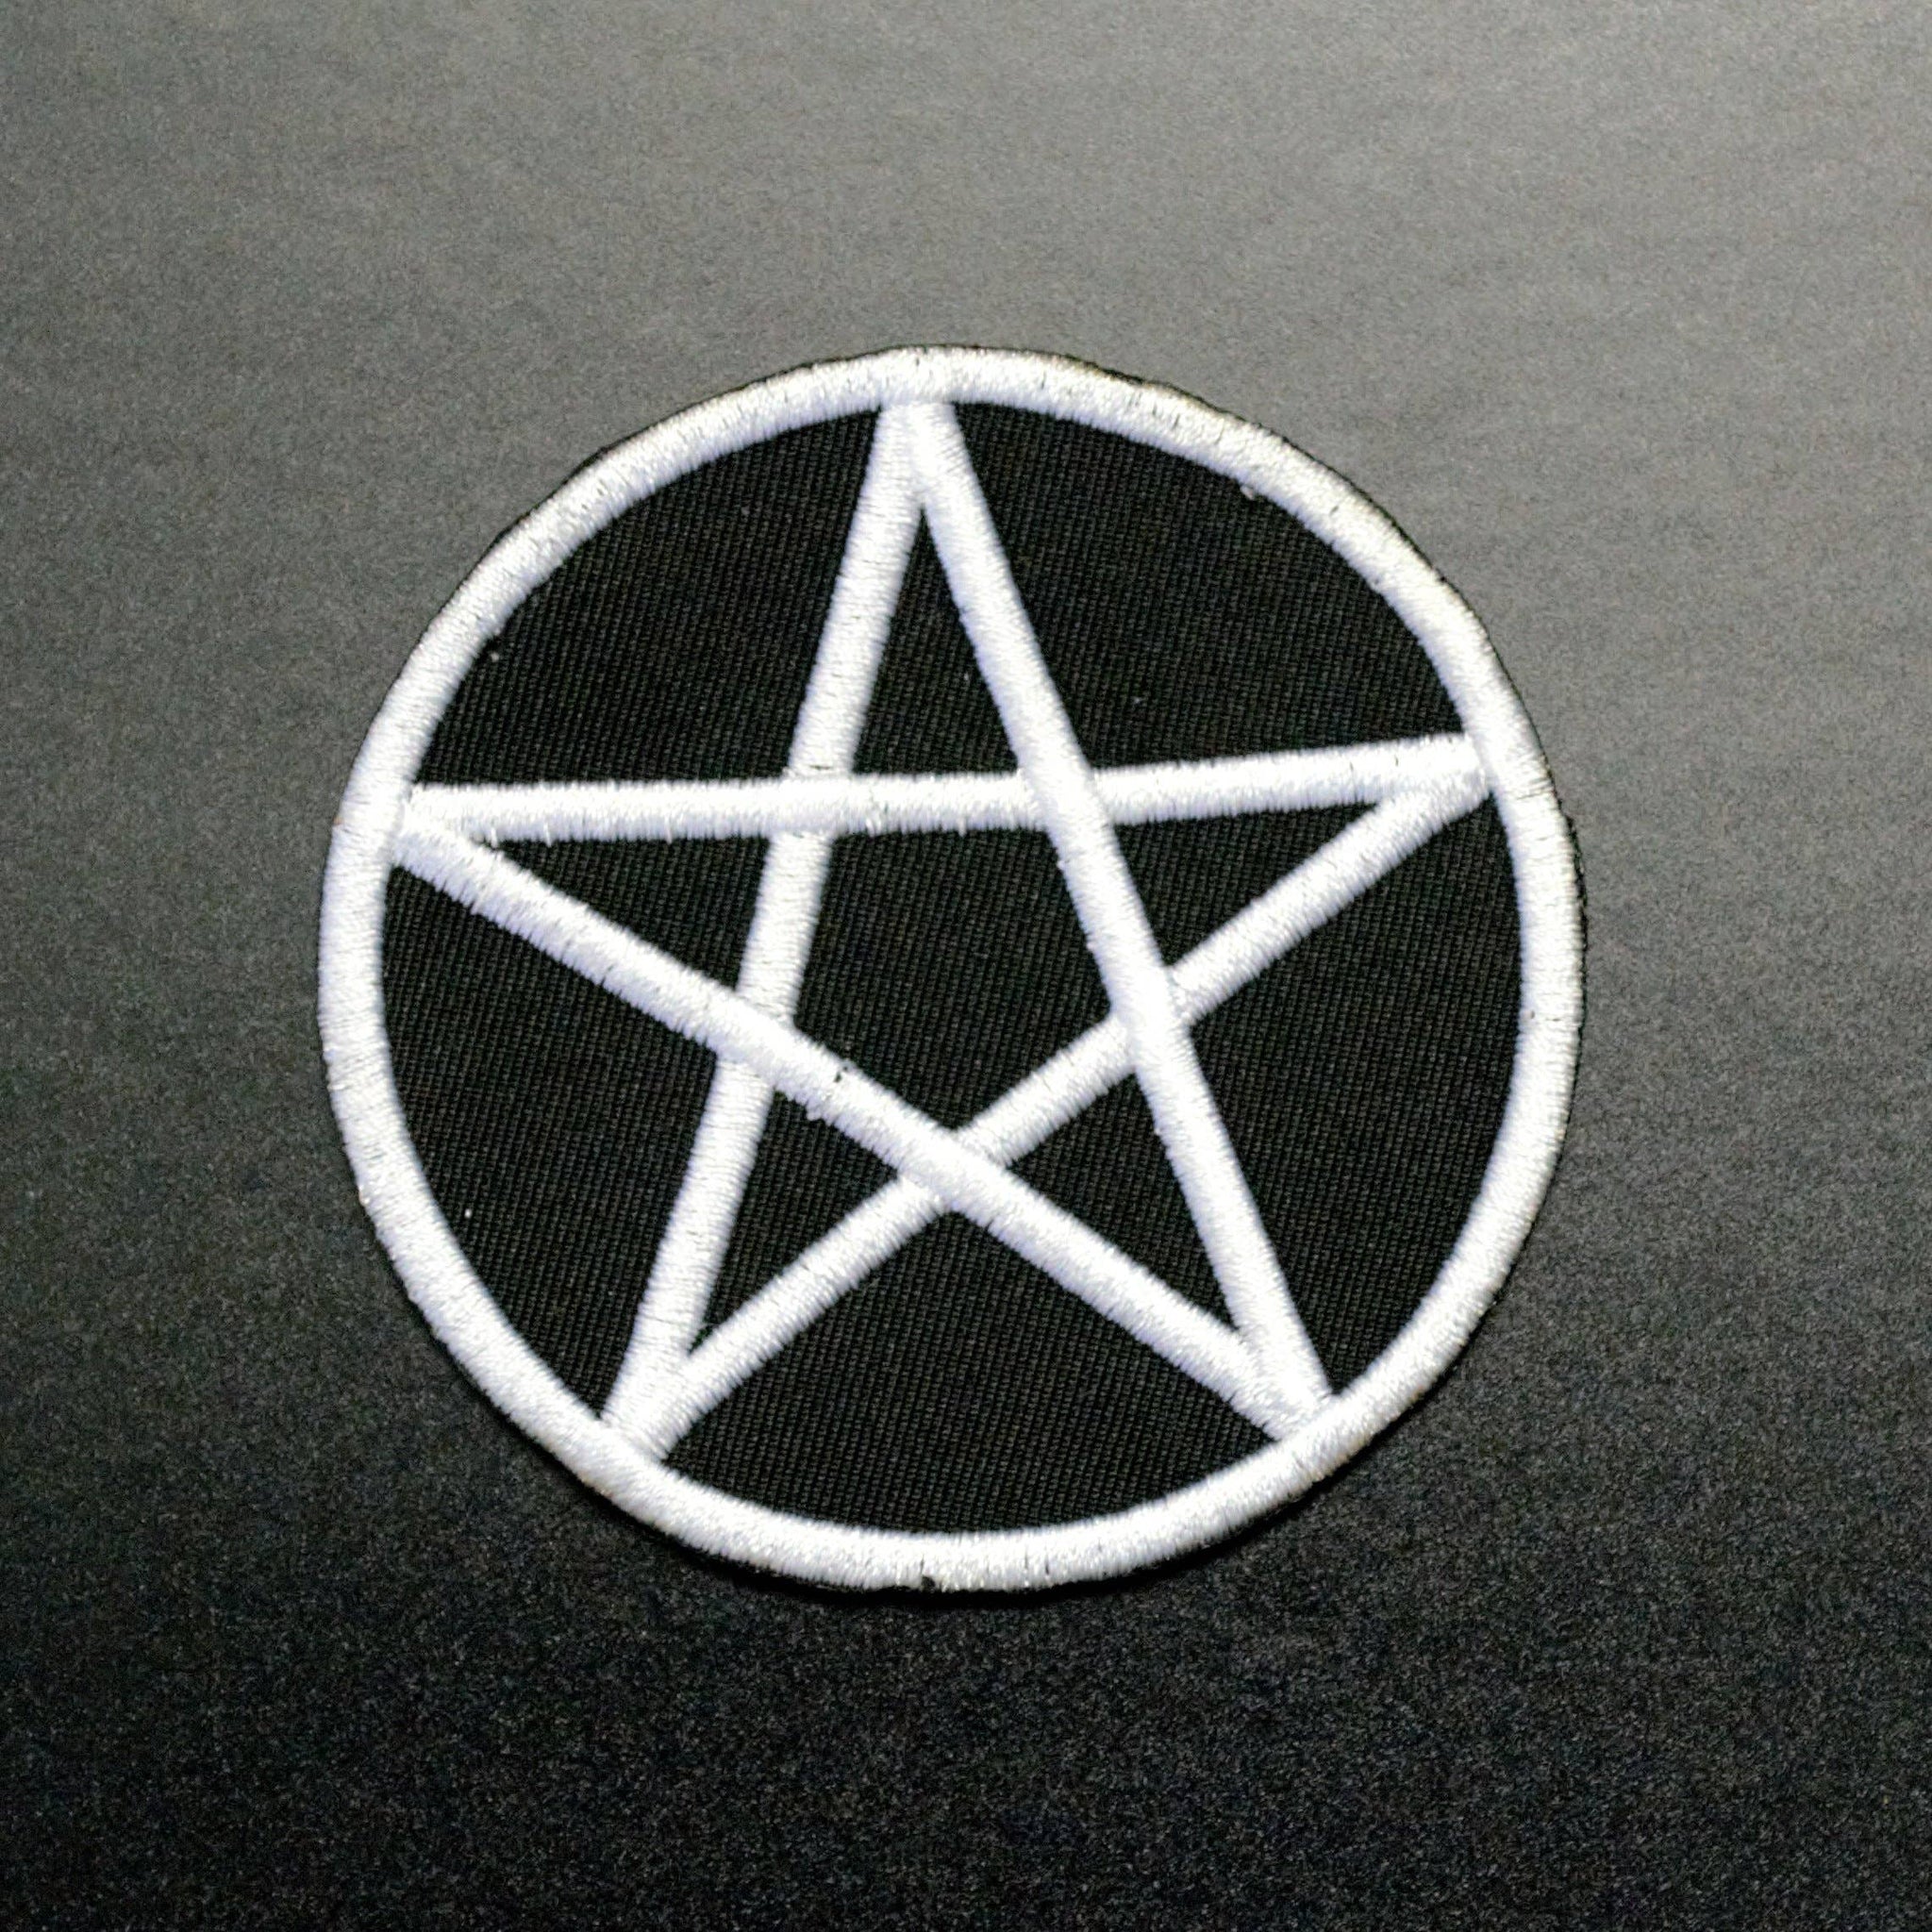 3" round white embroidery on black canvas Pentagram patch